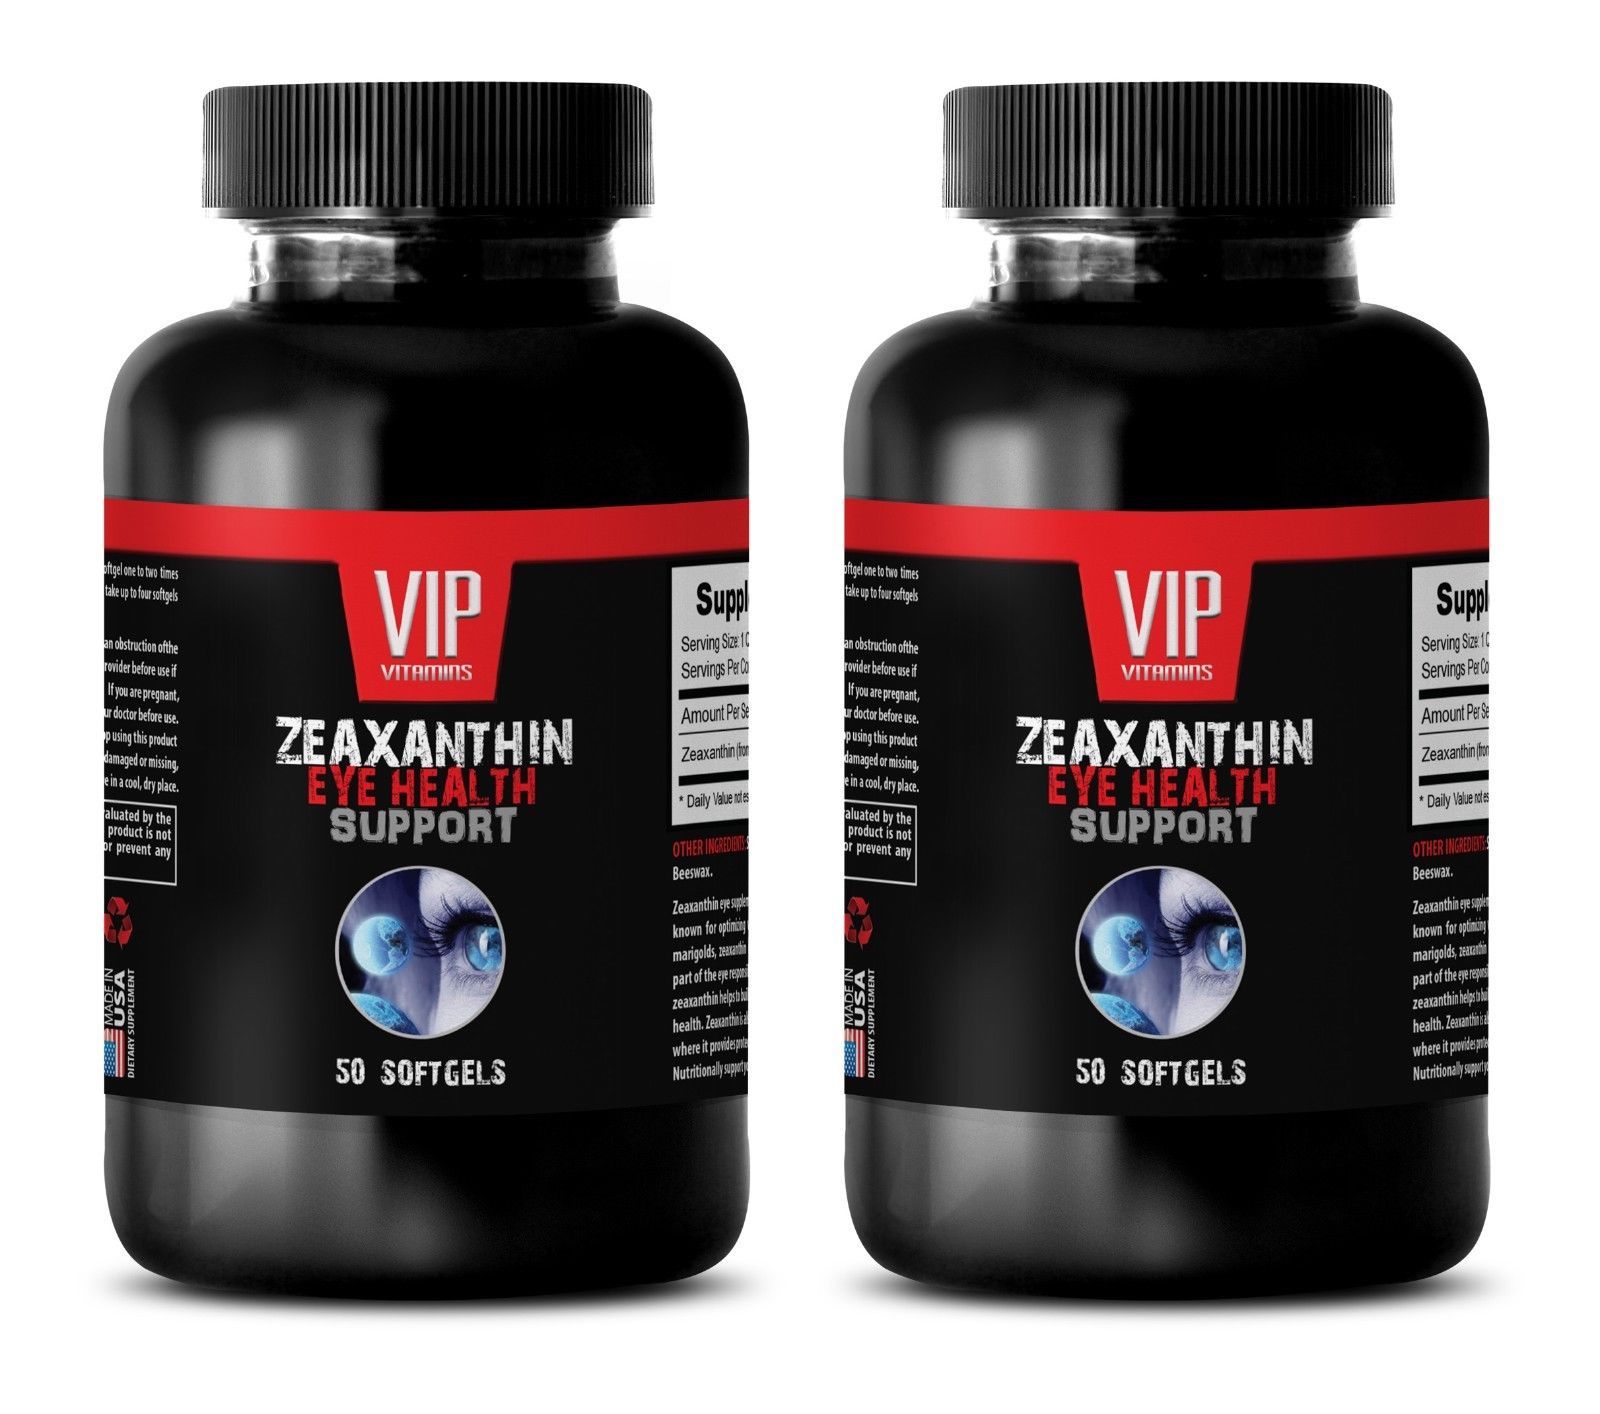 Primary image for anti inflammatory capsule - ZEAXANTHIN EYE HEALTH 2B - immune support adults